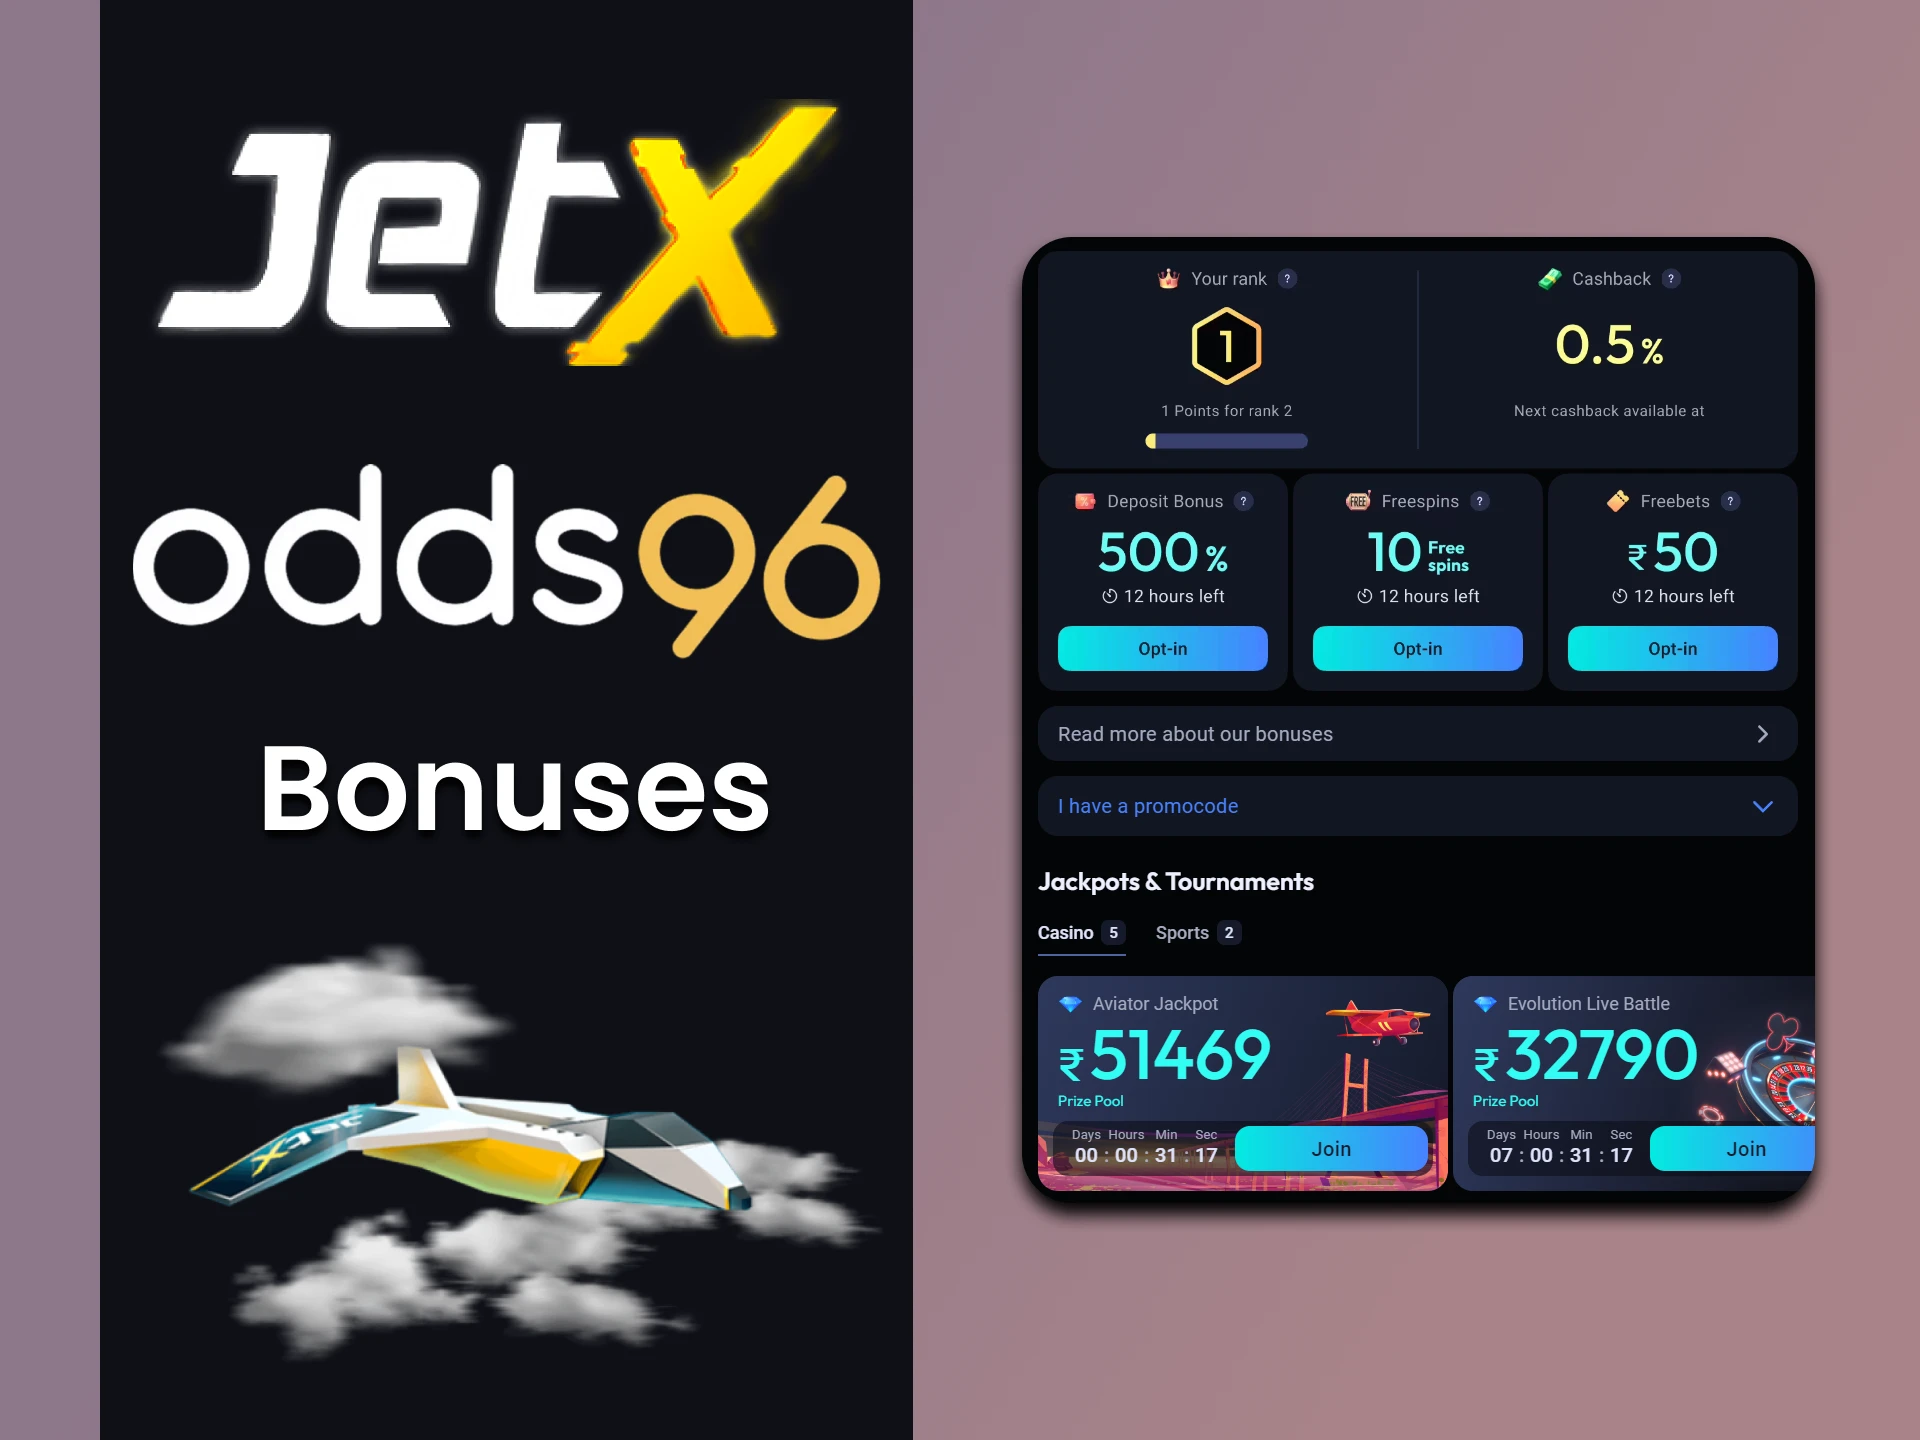 When playing JetX you receive bonuses from Odds96.